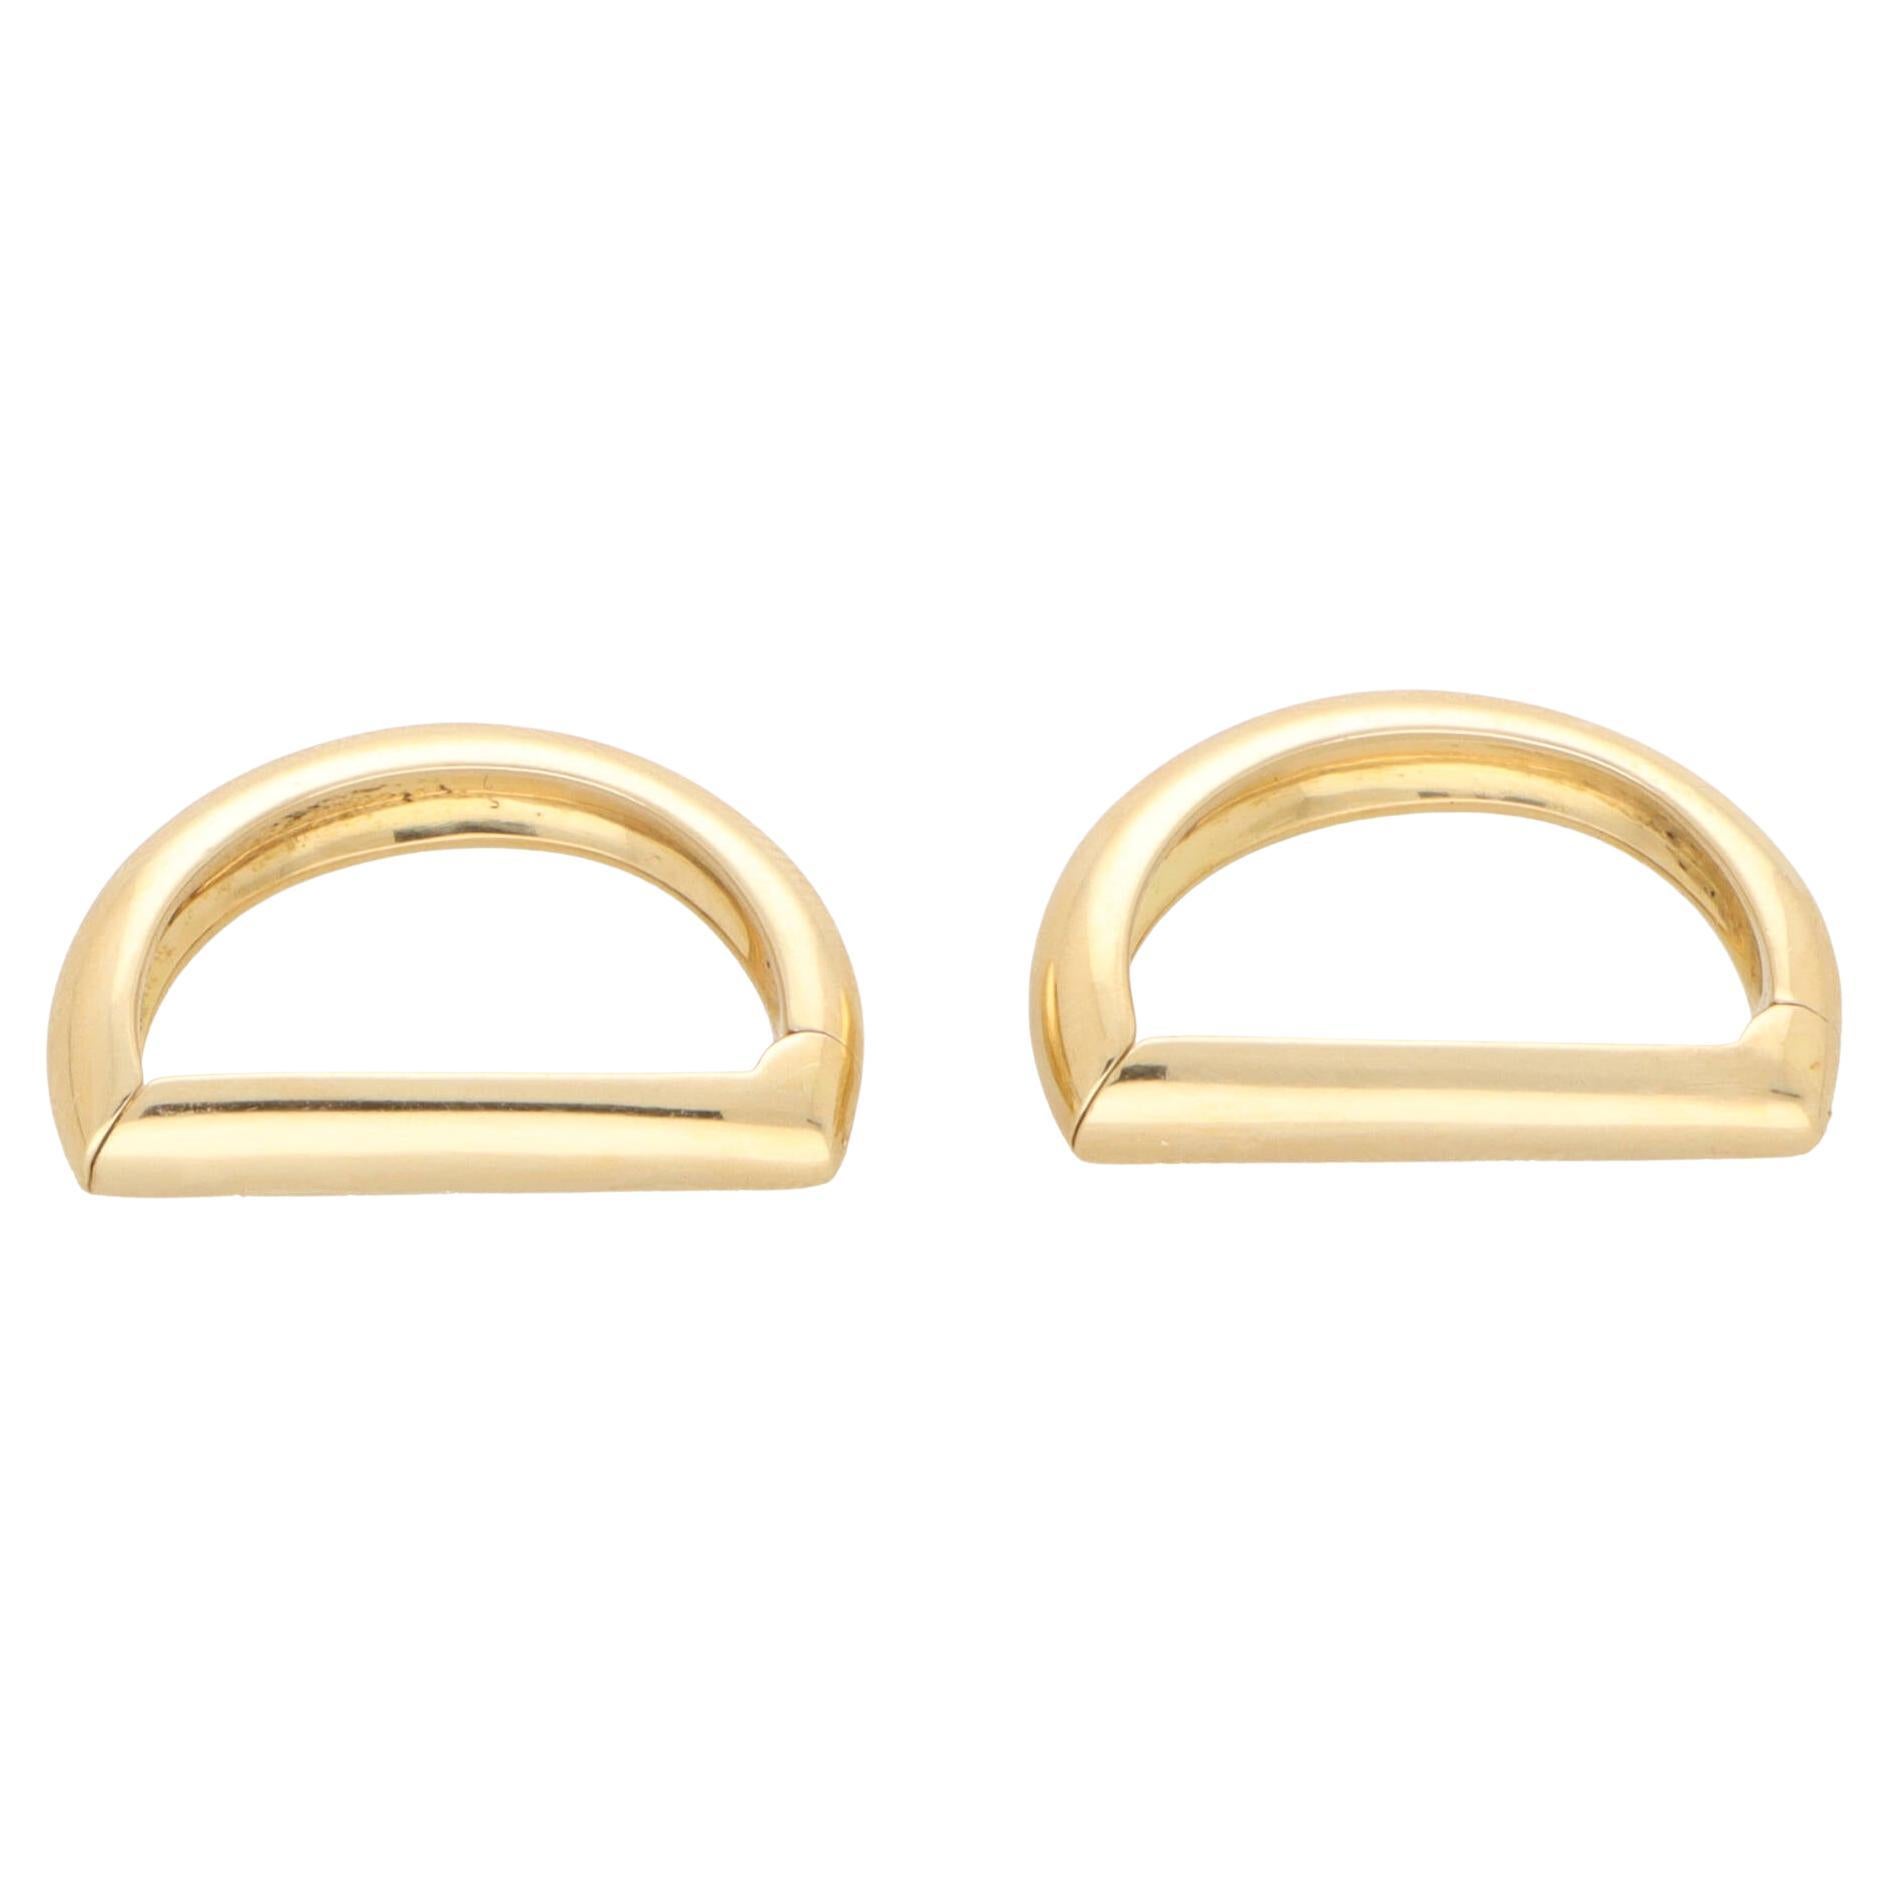 Vintage 1980s Cartier Clip Cufflinks Set in 18k Yellow Gold For Sale